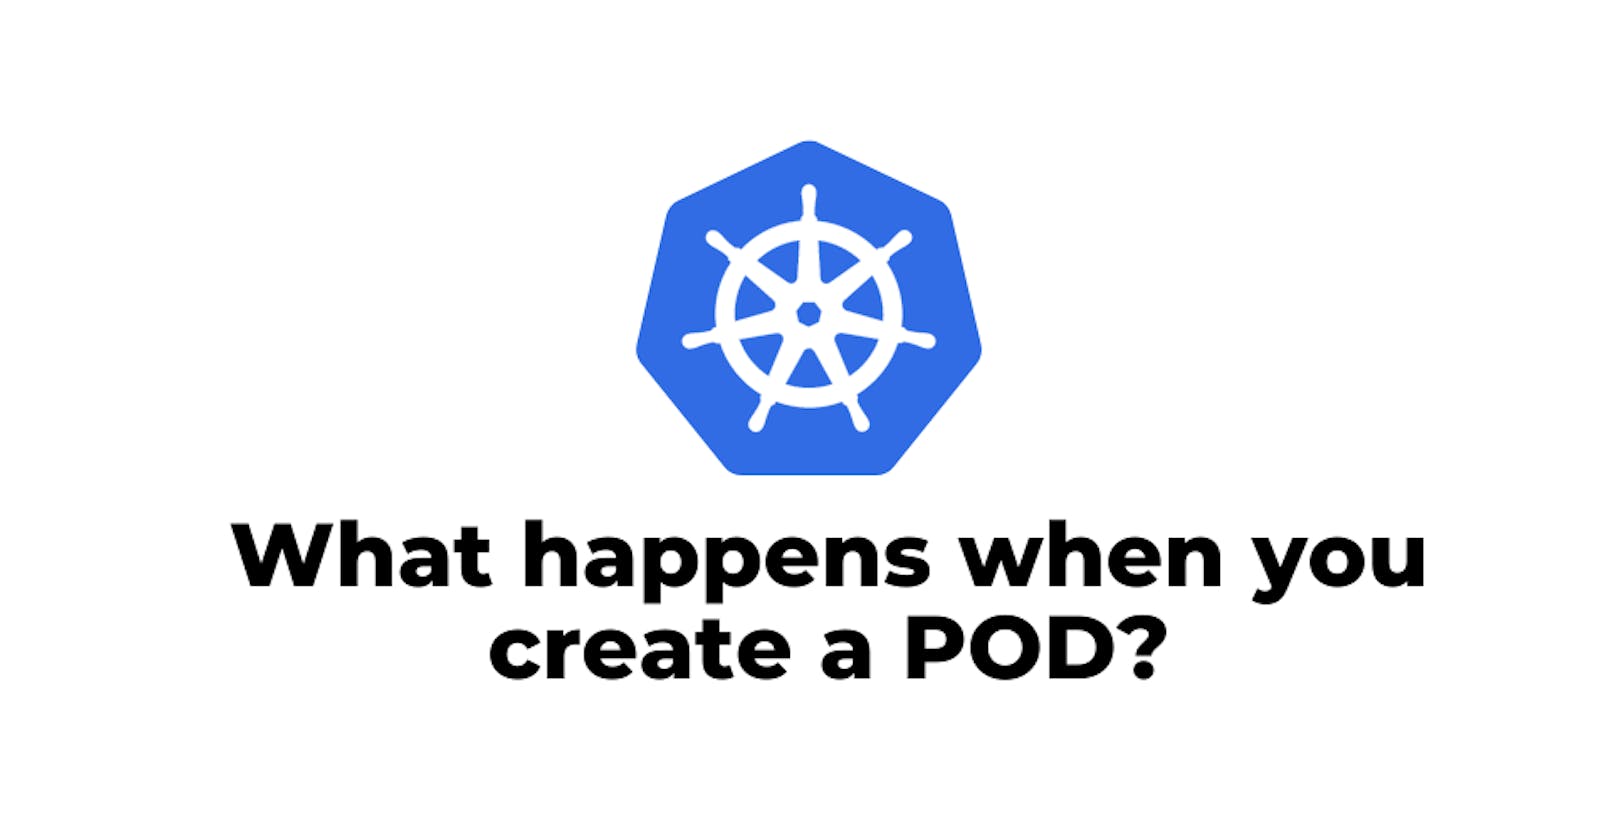 What happens when you create a pod?